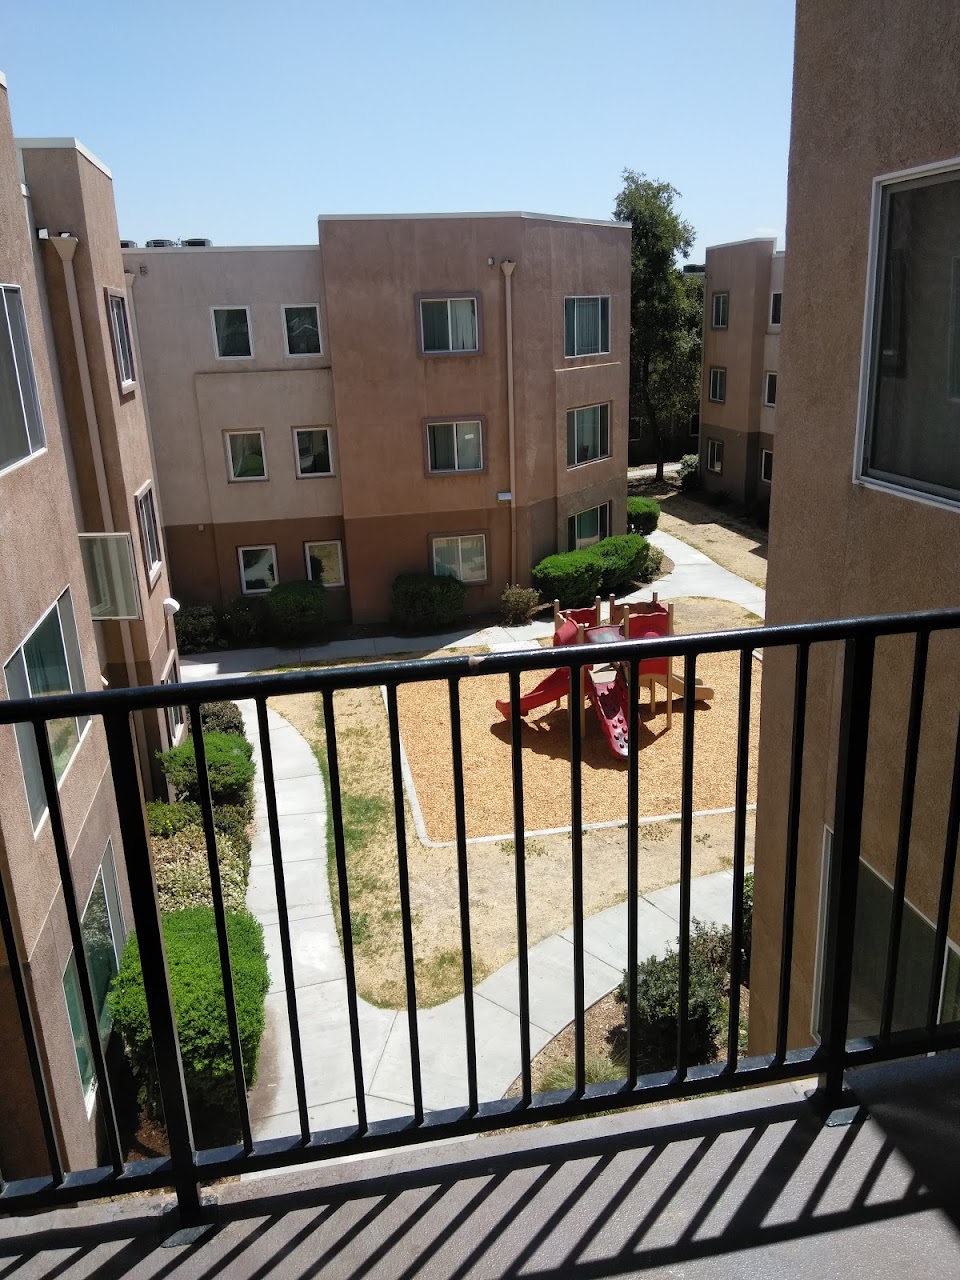 Photo of COTTONWOOD GARDENS. Affordable housing located at 1750 CHEATHAM AVE BAKERSFIELD, CA 93307